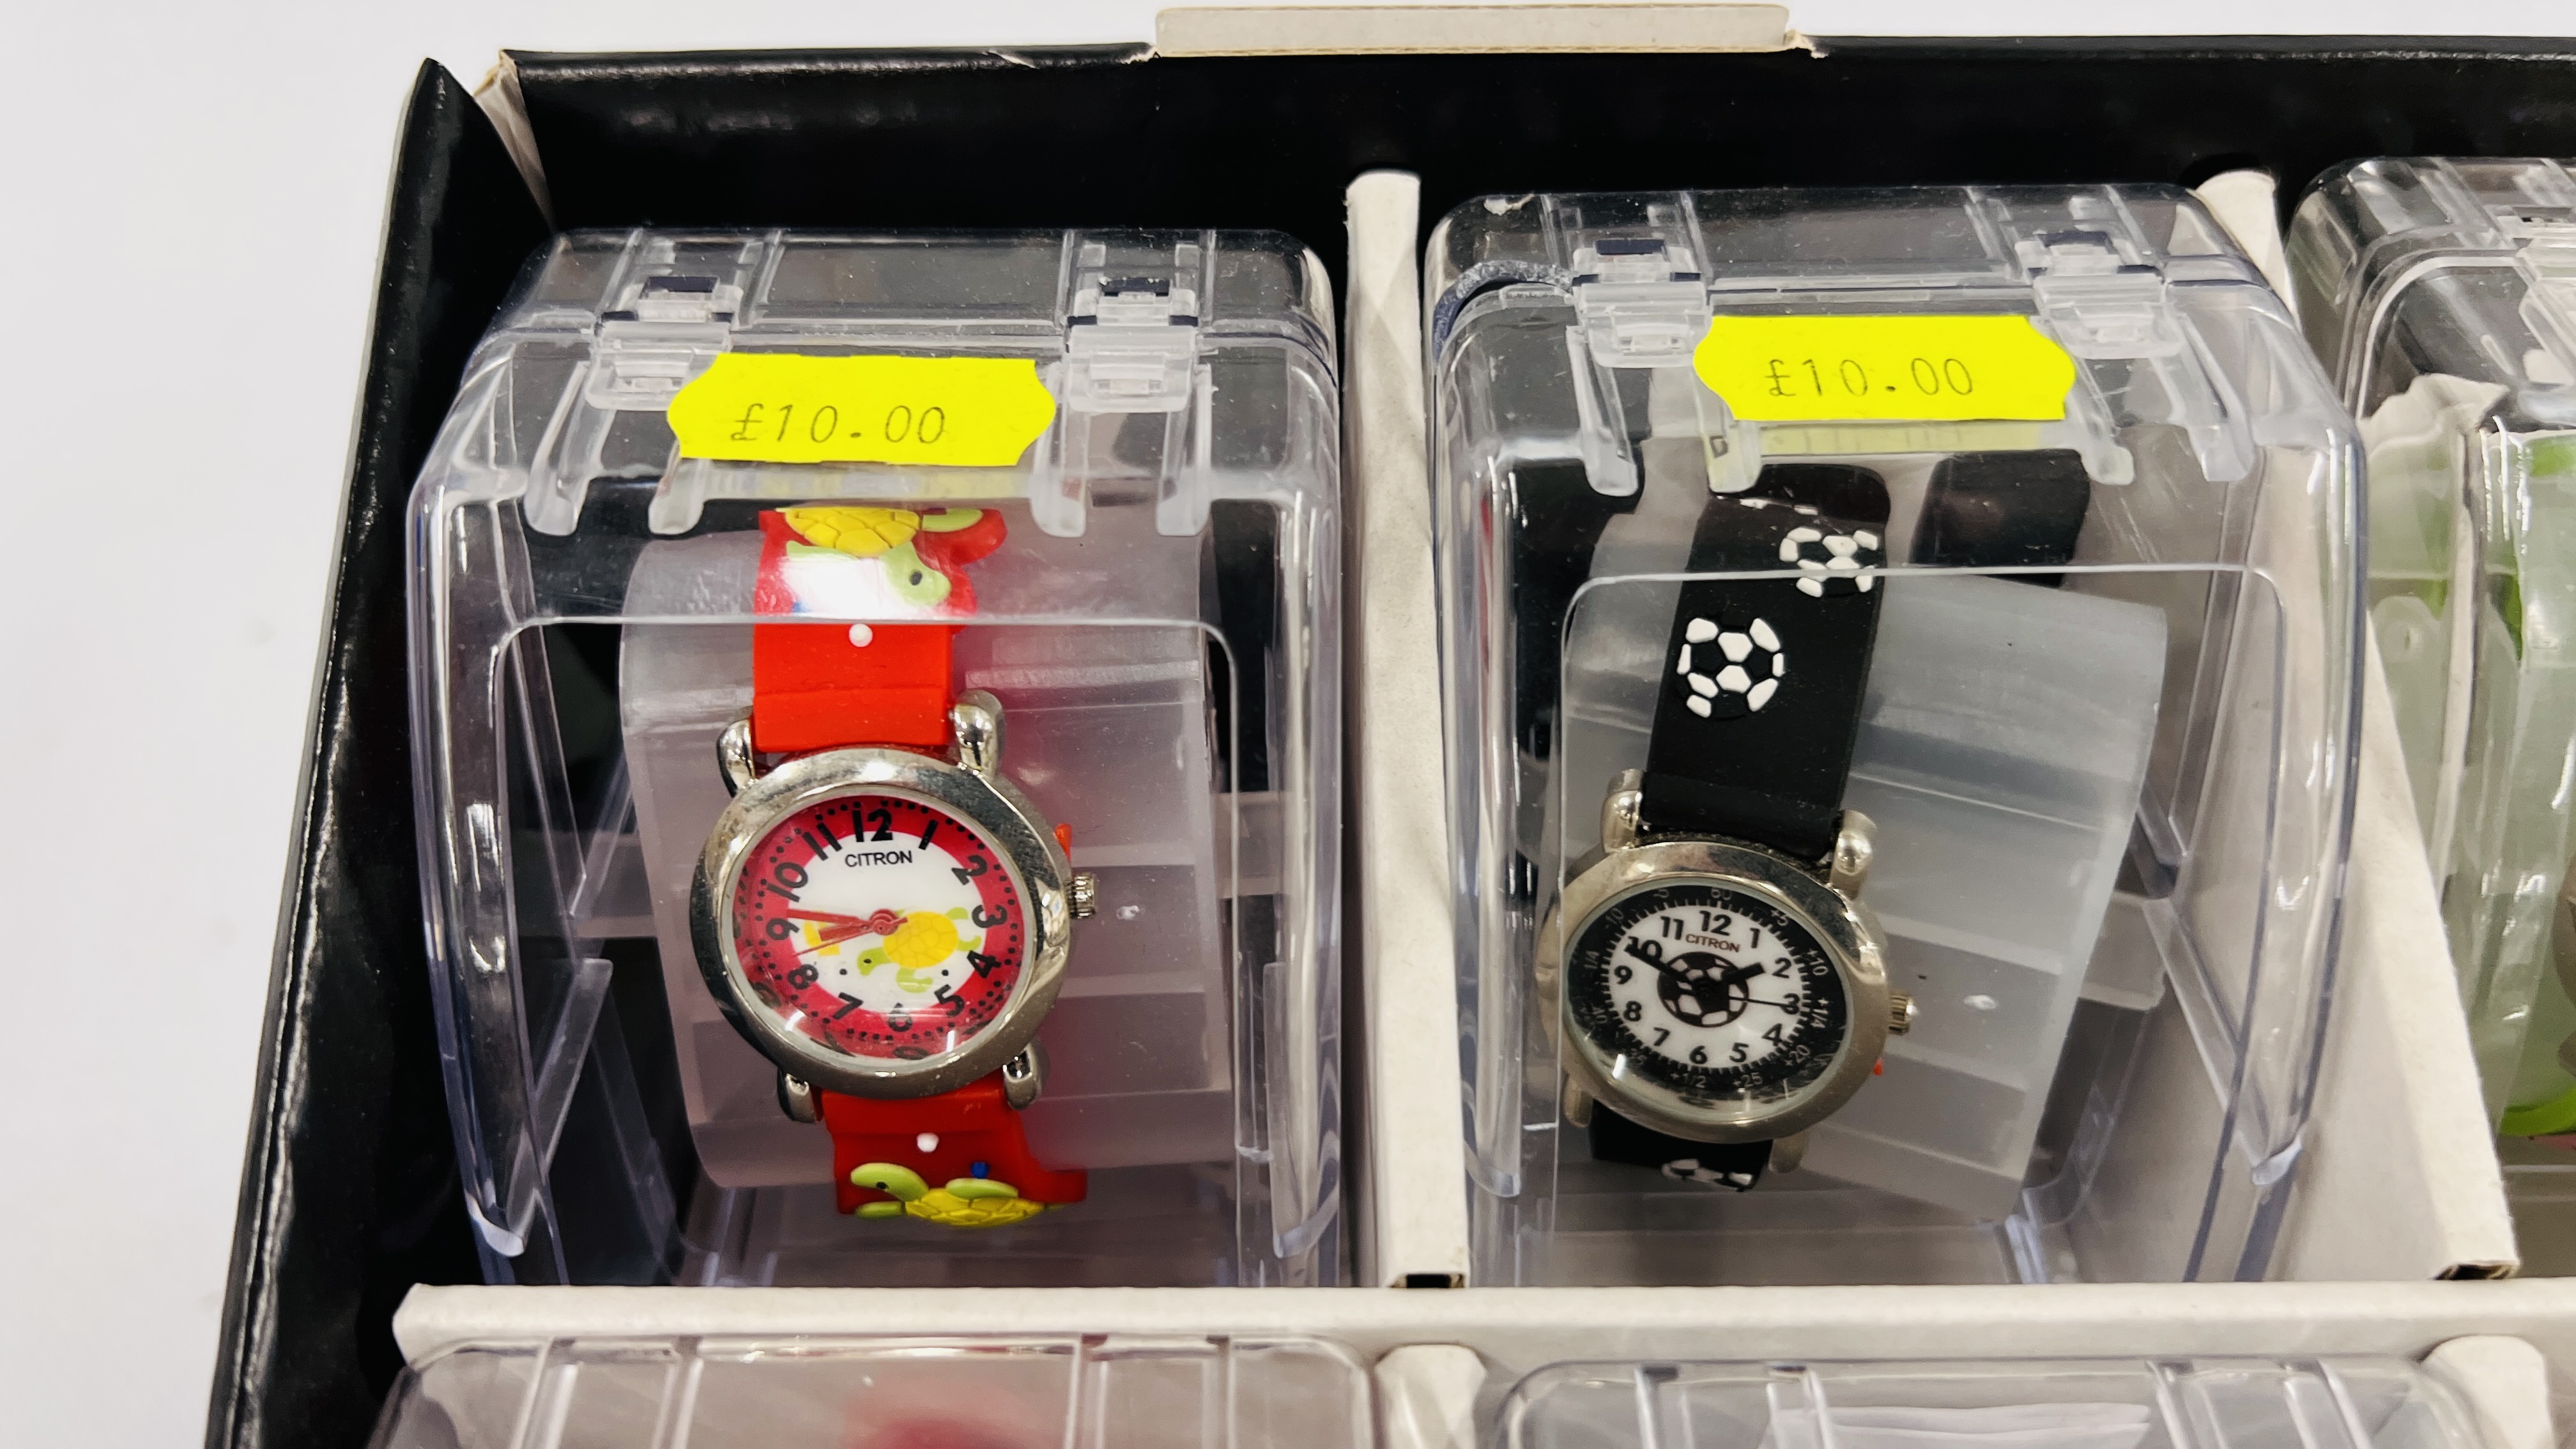 BANKRUPTCY STOCK - 12 X BOXED CITRON CHILDREN'S WRIST WATCHES VARIOUS DESIGNS. - Image 6 of 7